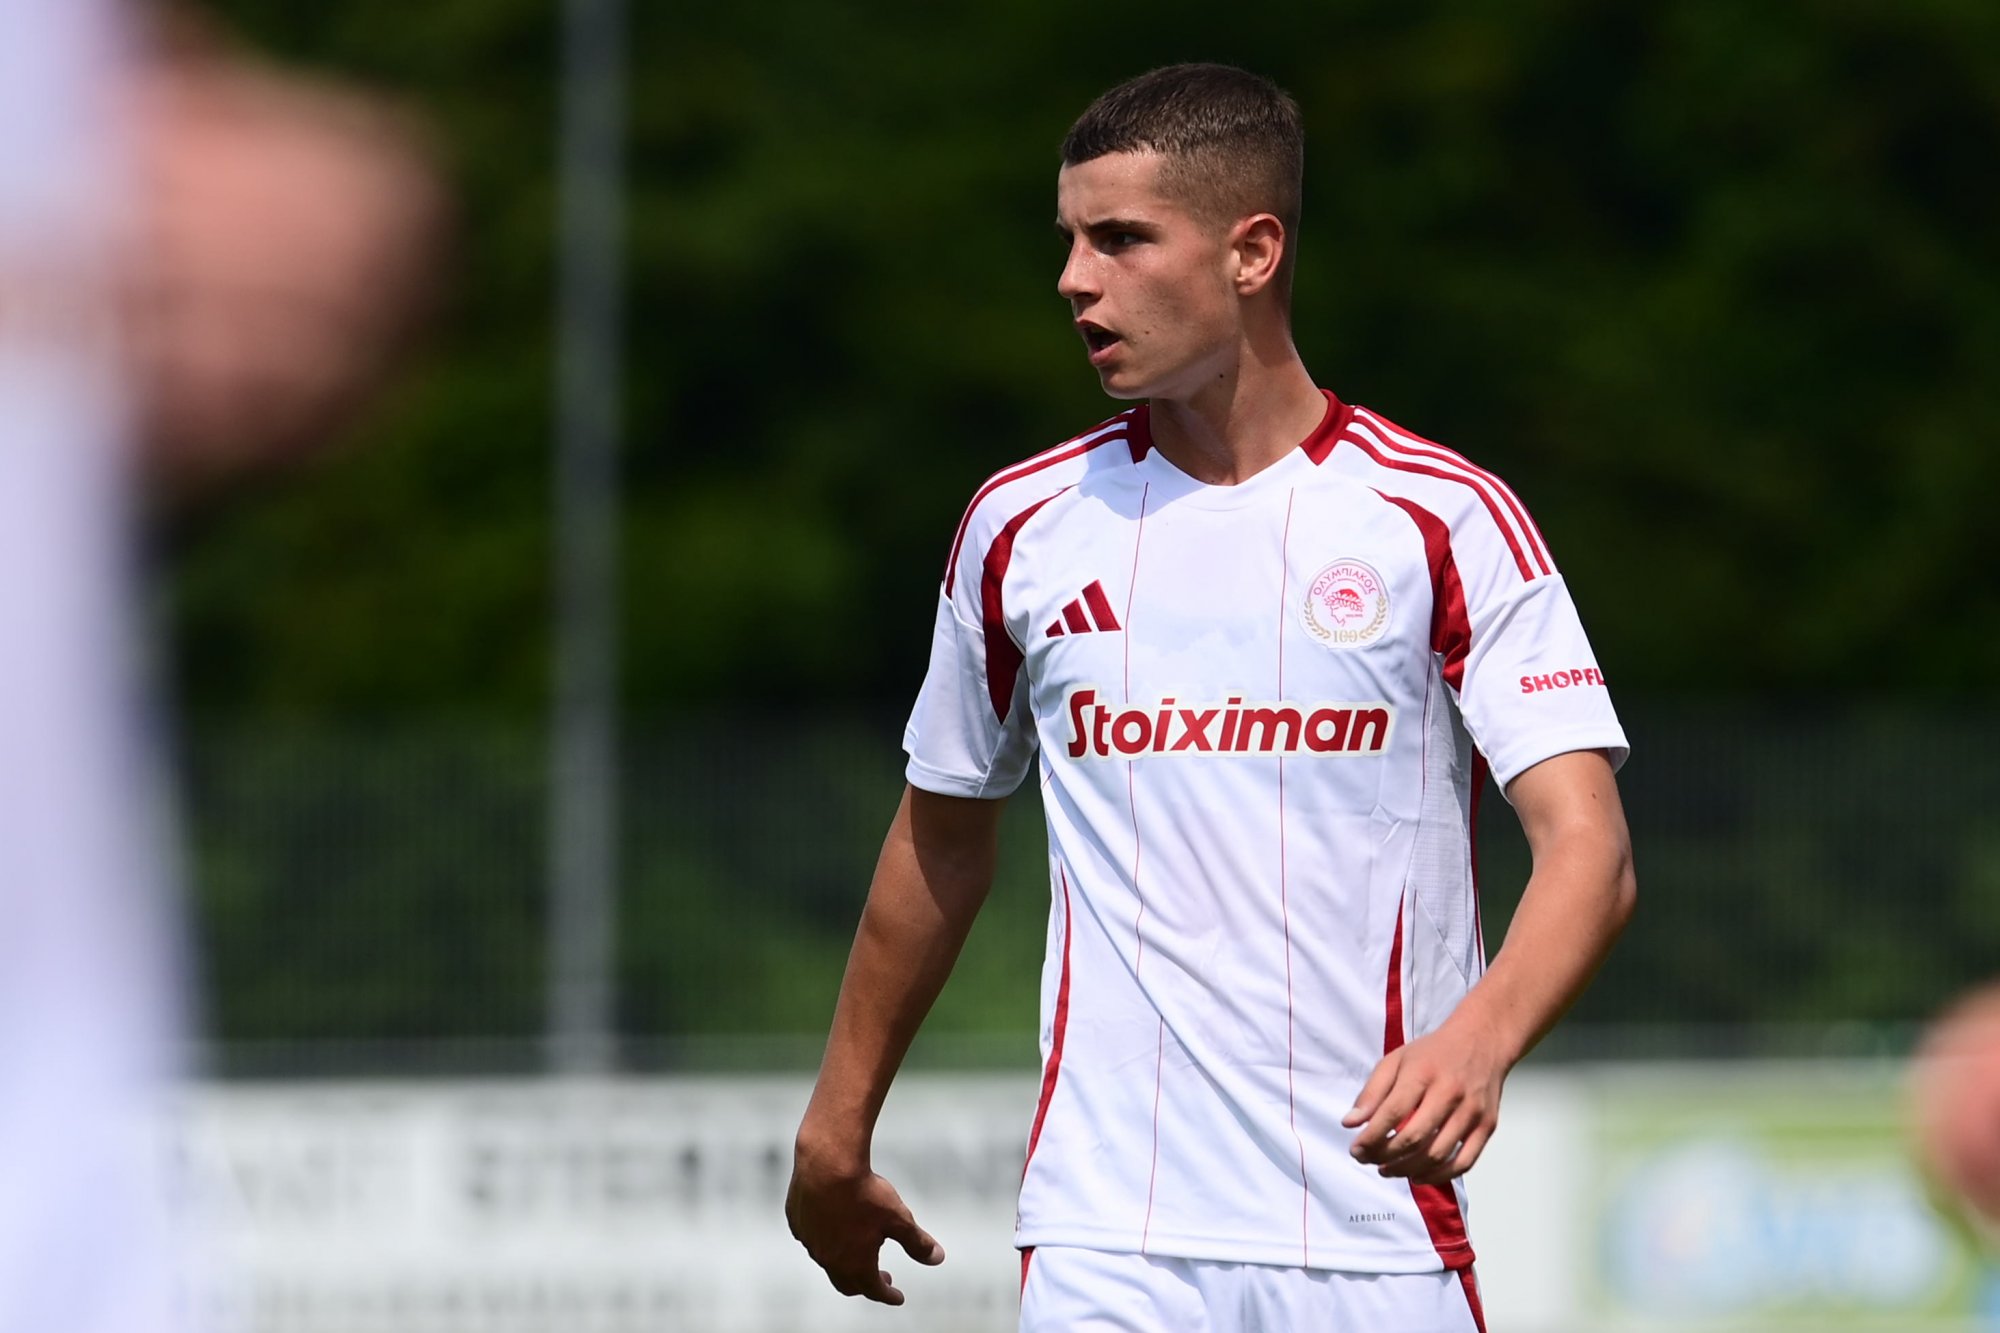 17-Year Old Christos Mouzakitis: The Future Is Now For Star Midfielder